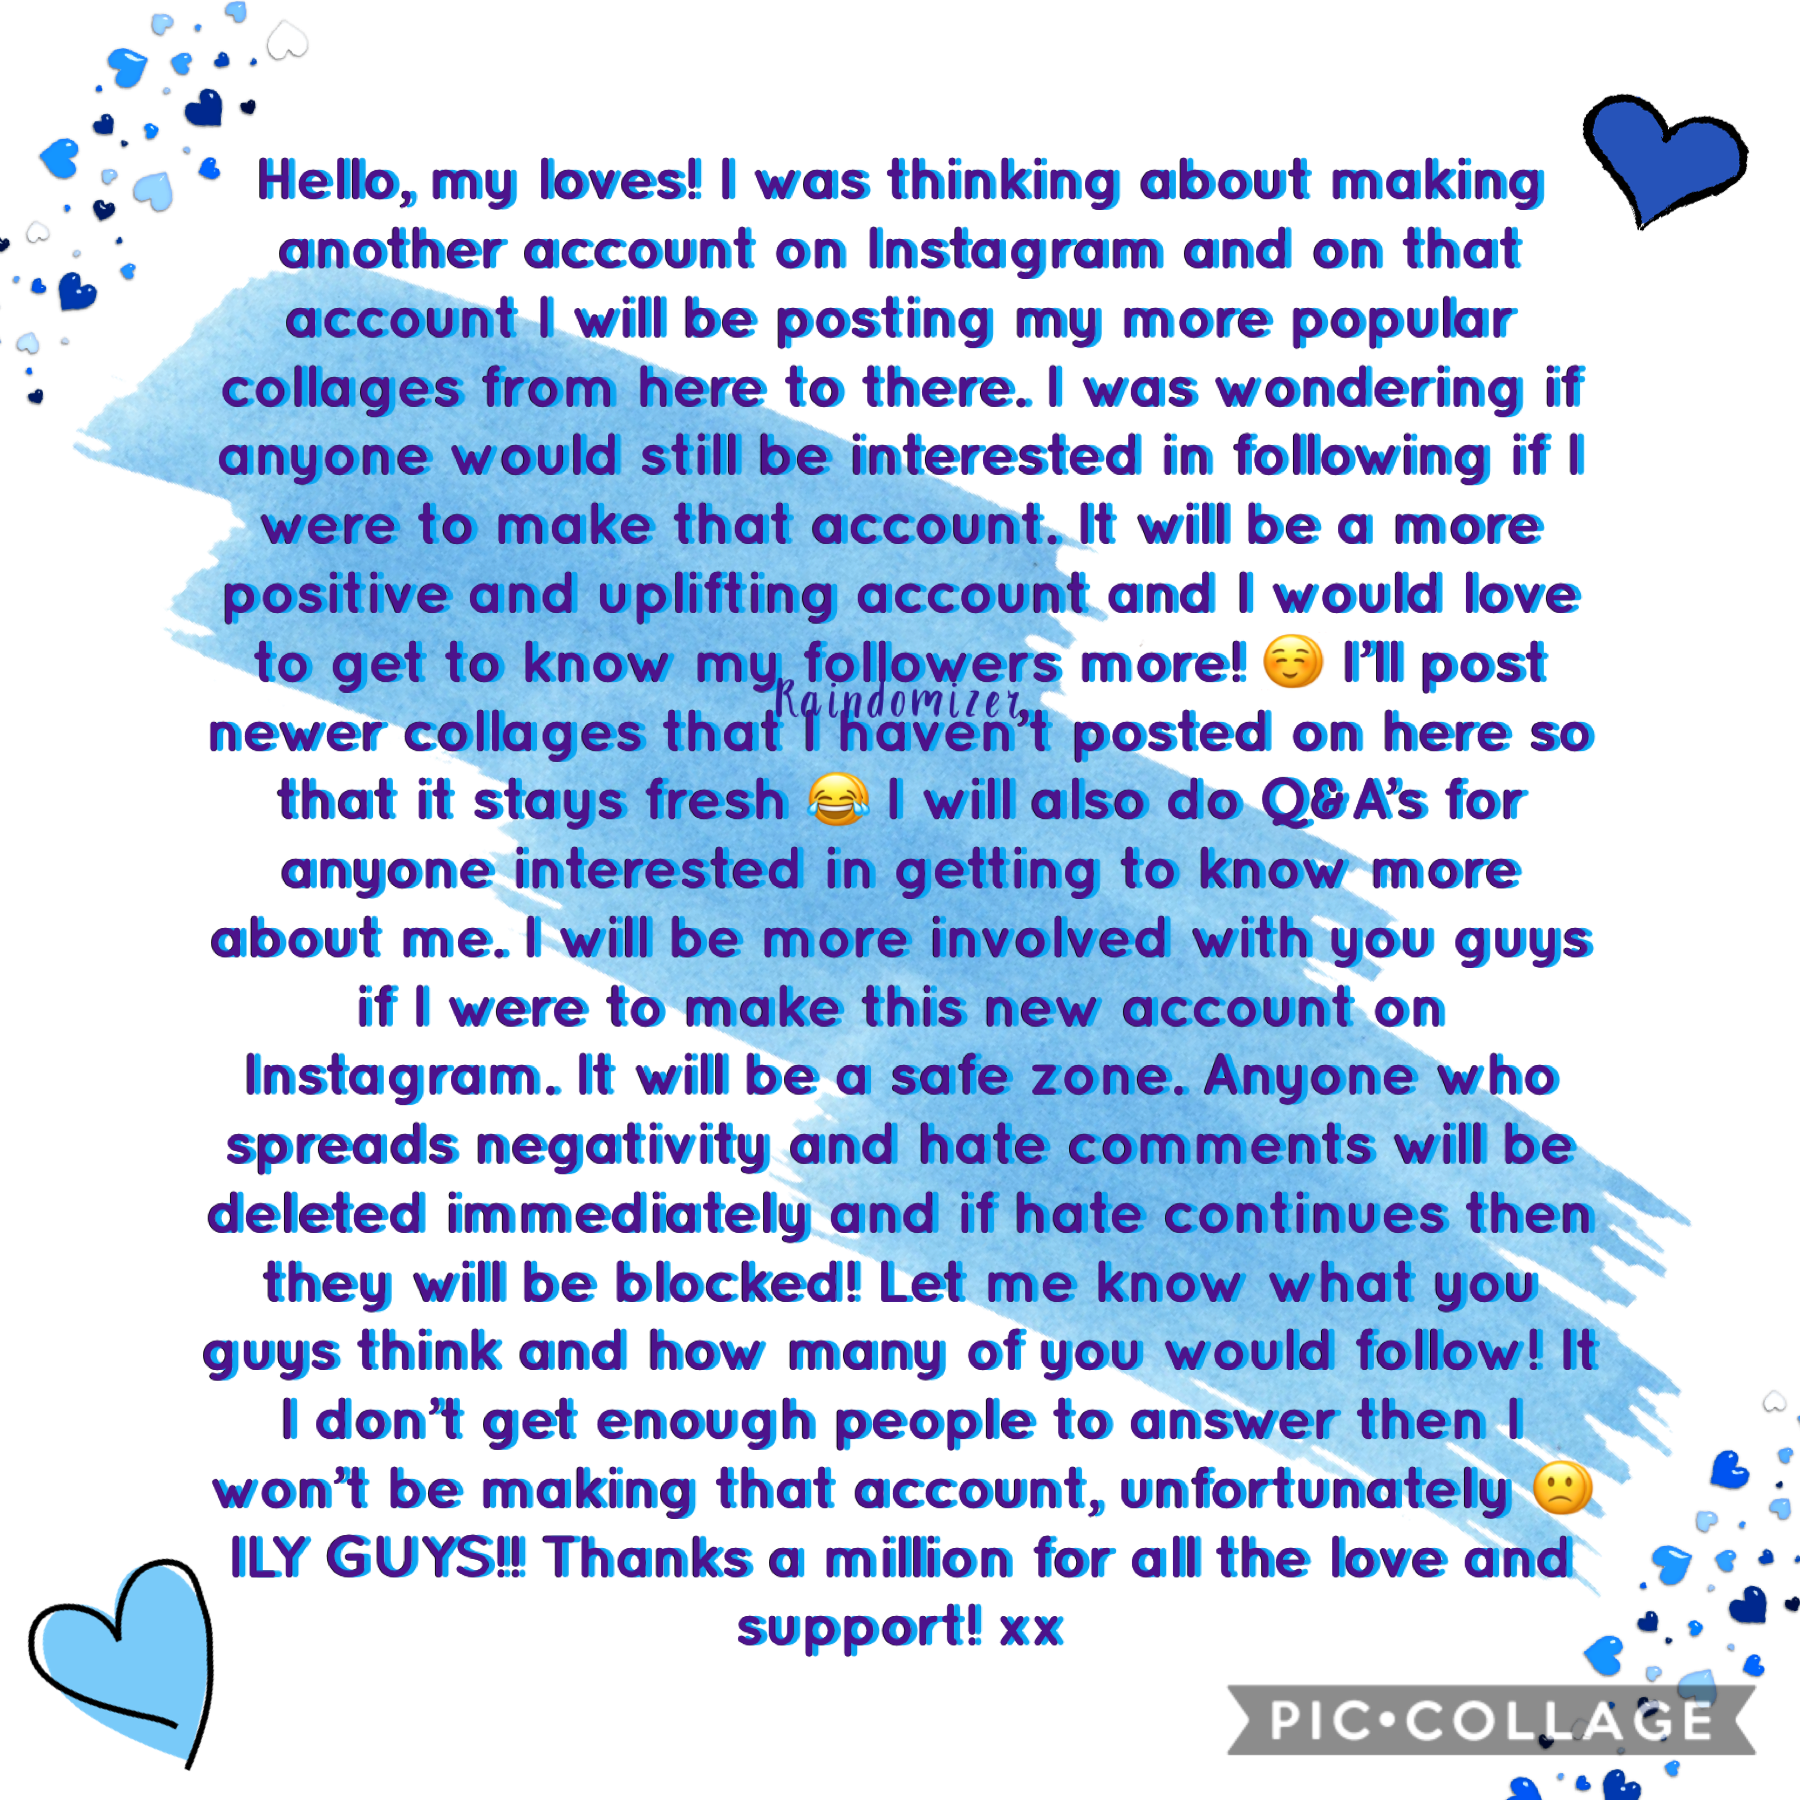 >C L I C K<
PLEASE PLEASE ANSWER!! I think it would be great and I would absolutely love to interact with my followers more! Ily all and I’m truly grateful for all of the support everyone has given me 😘❤️